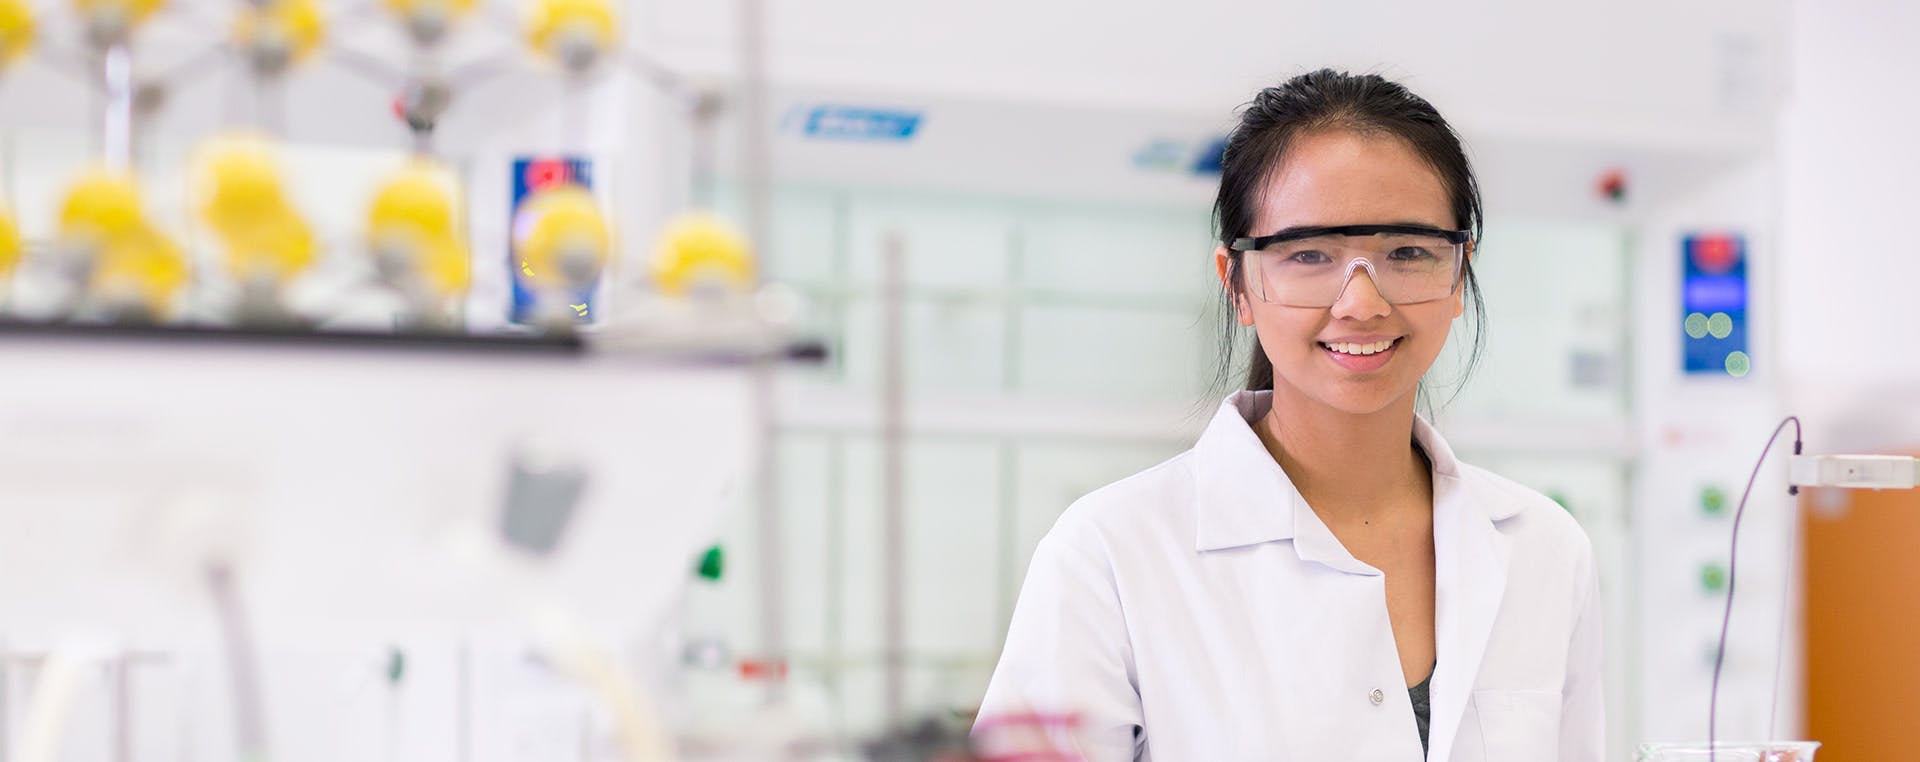 Student in laboratory smiling